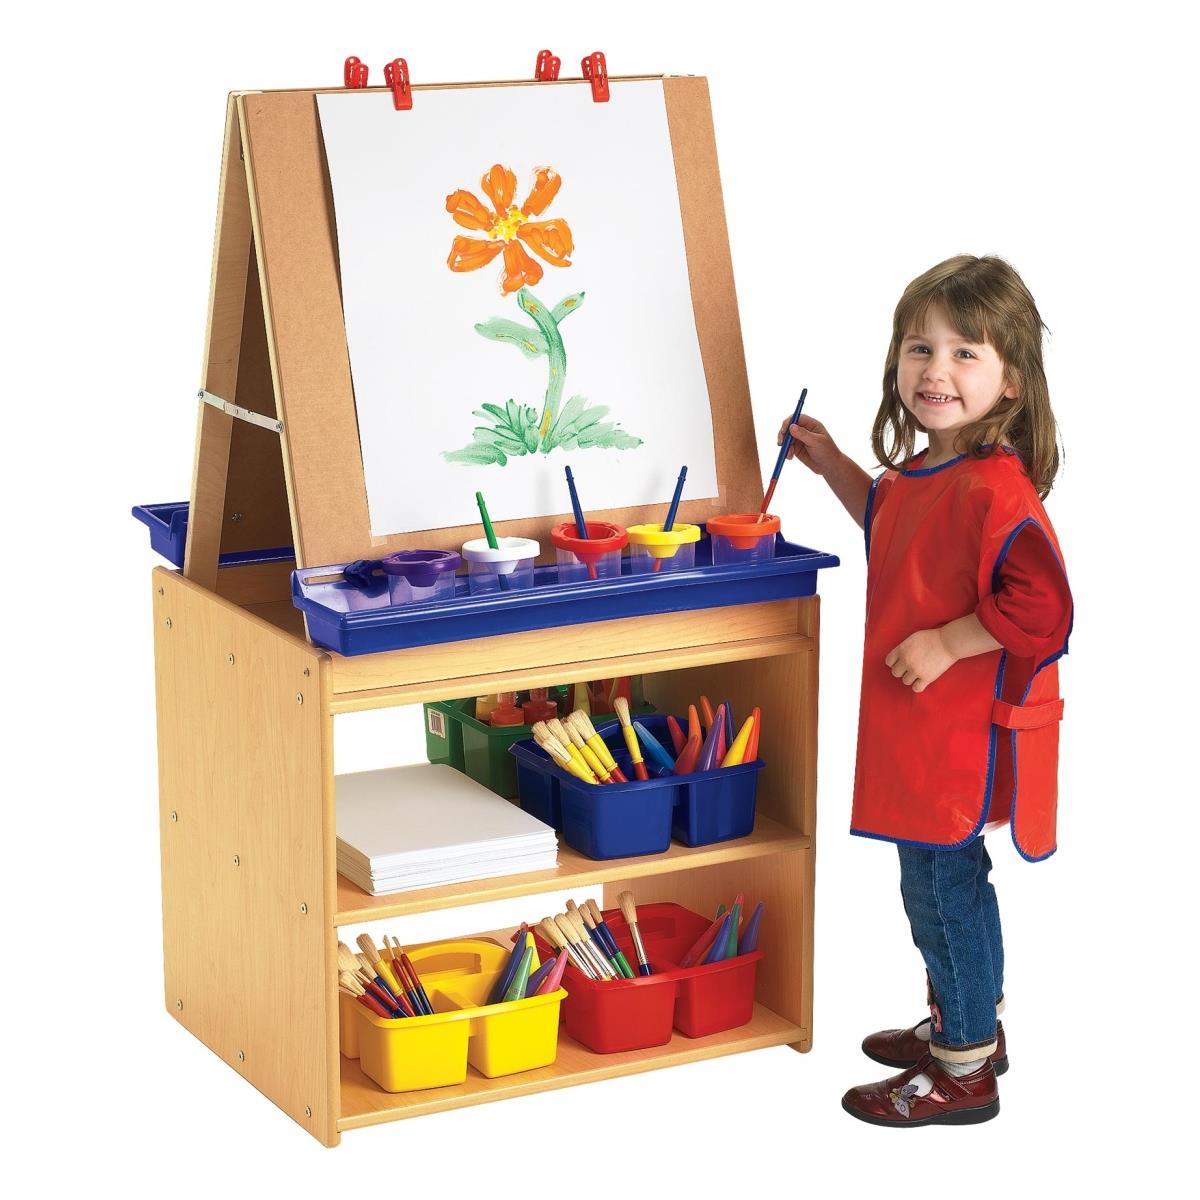 Angeles Ang7157 Value Line 2-station Art Center - Uv Finish, Maple - 46 X 20 X 24 In.